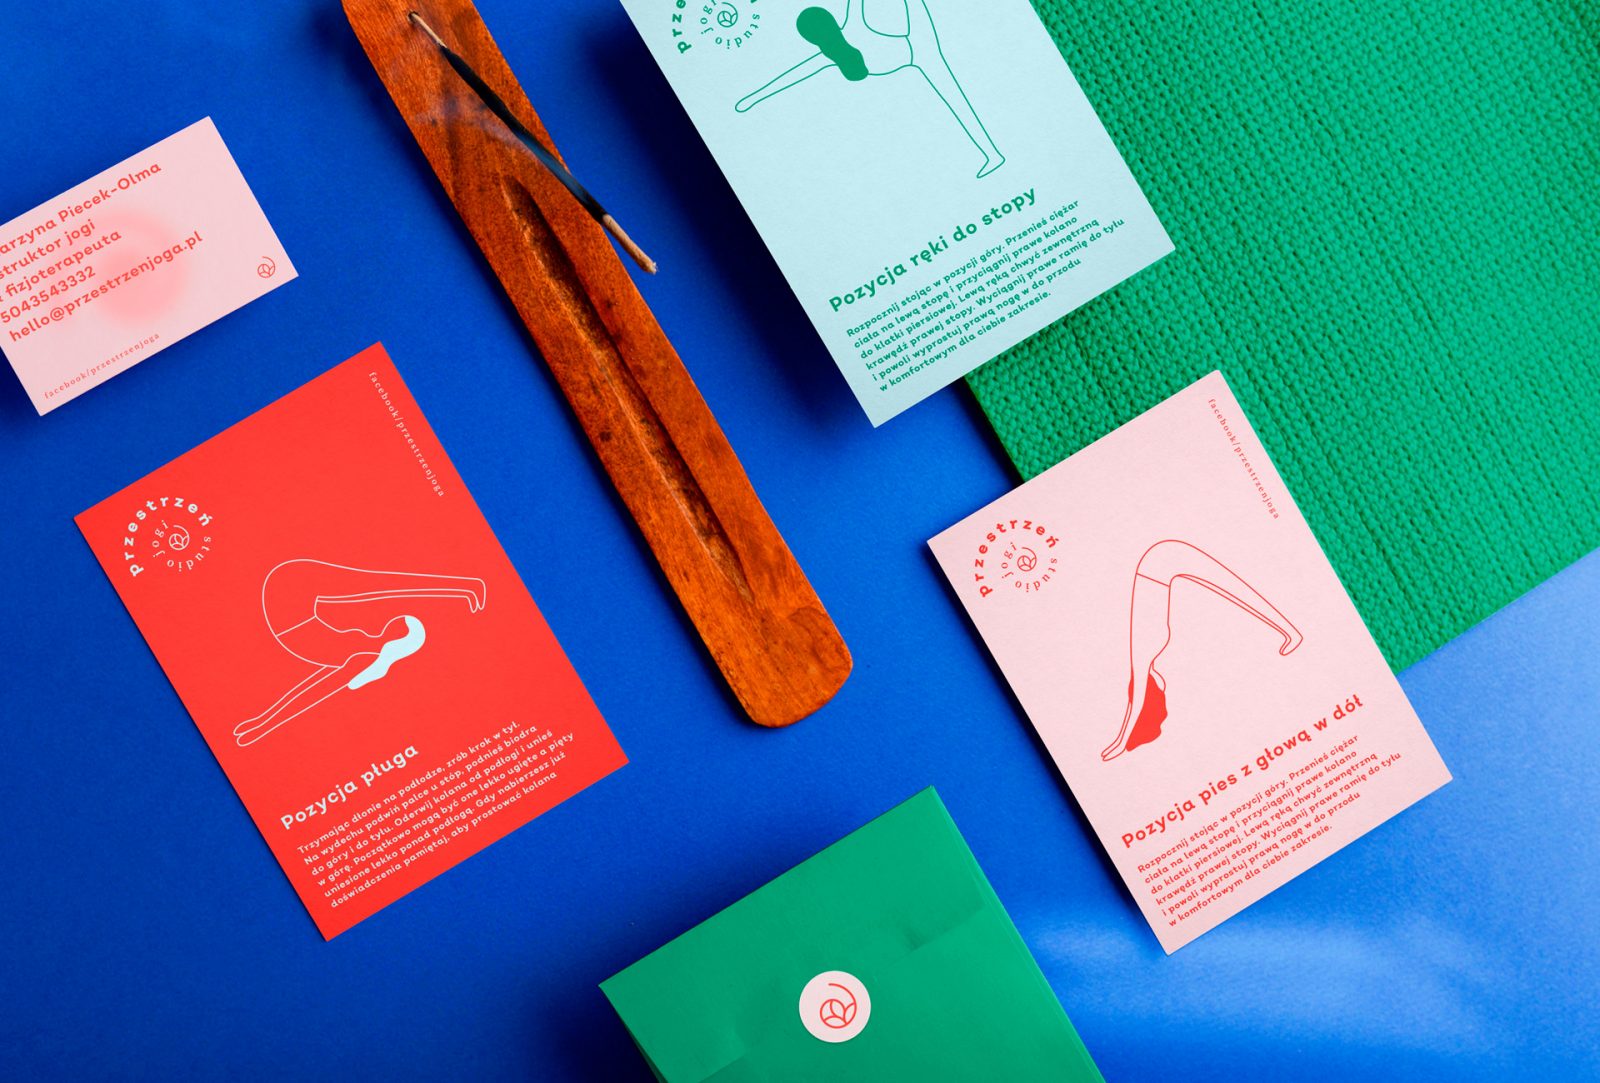 10 Yoga Studio Branding Concepts to Help You Feel Relaxed & Mindful